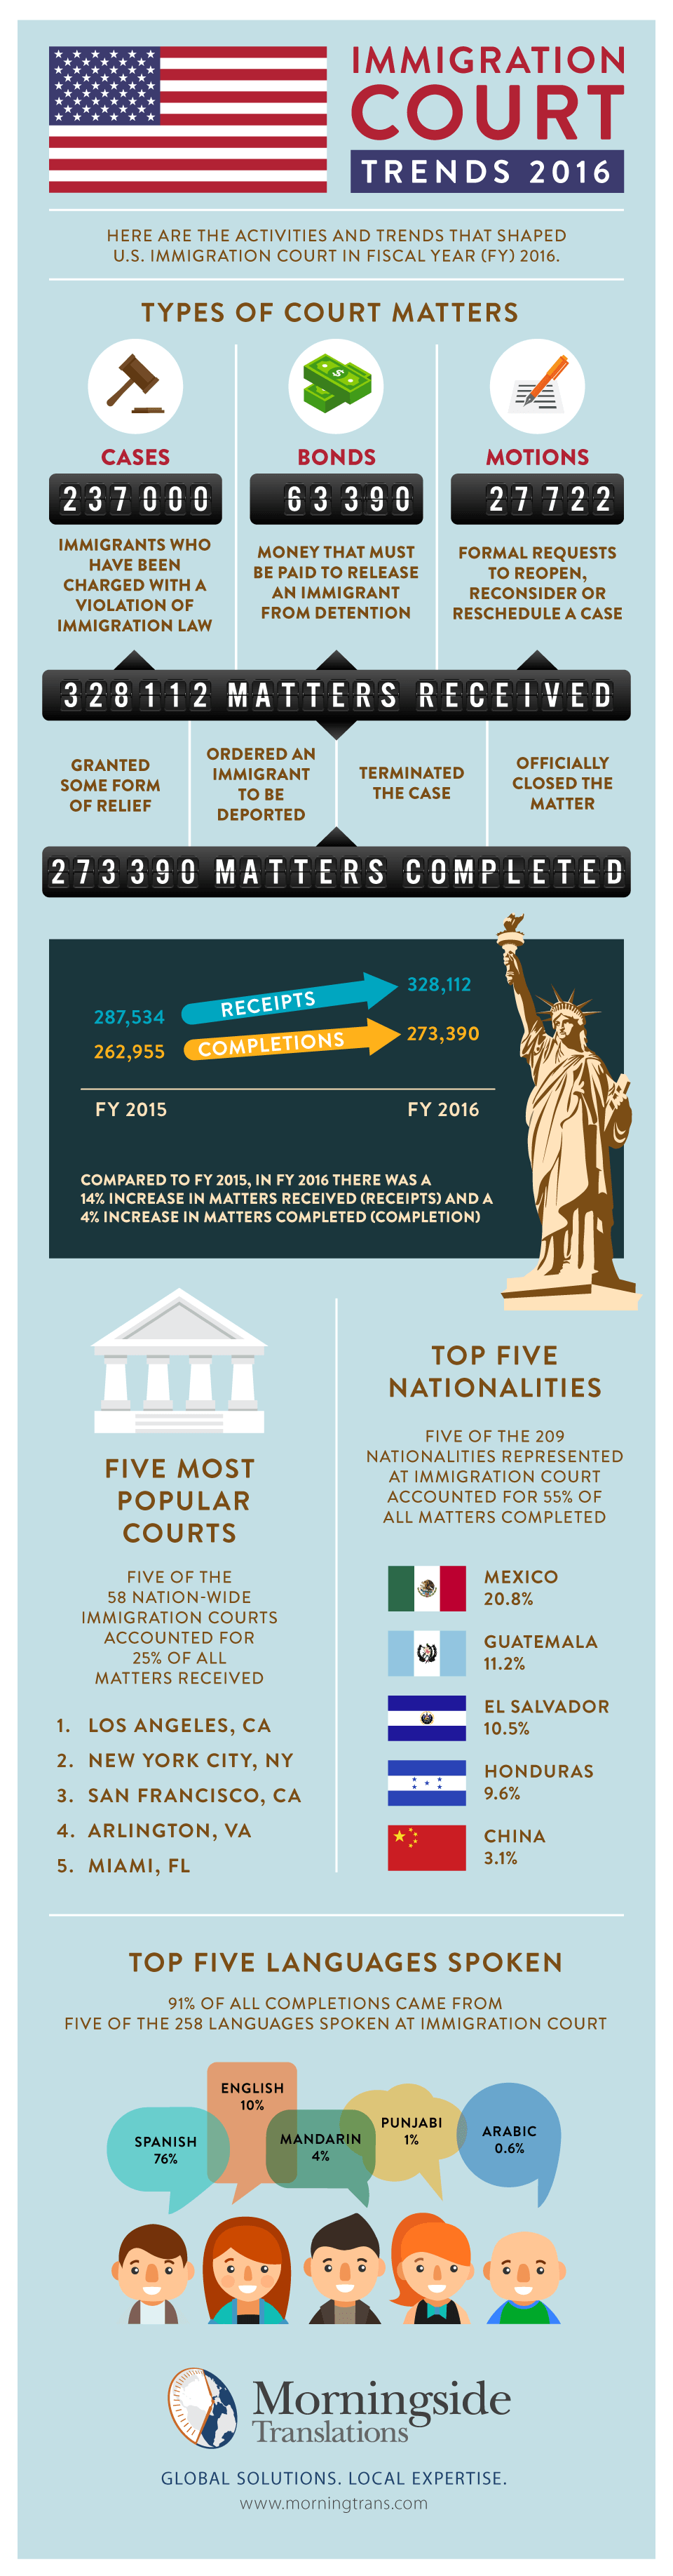 2016 immigration court trends